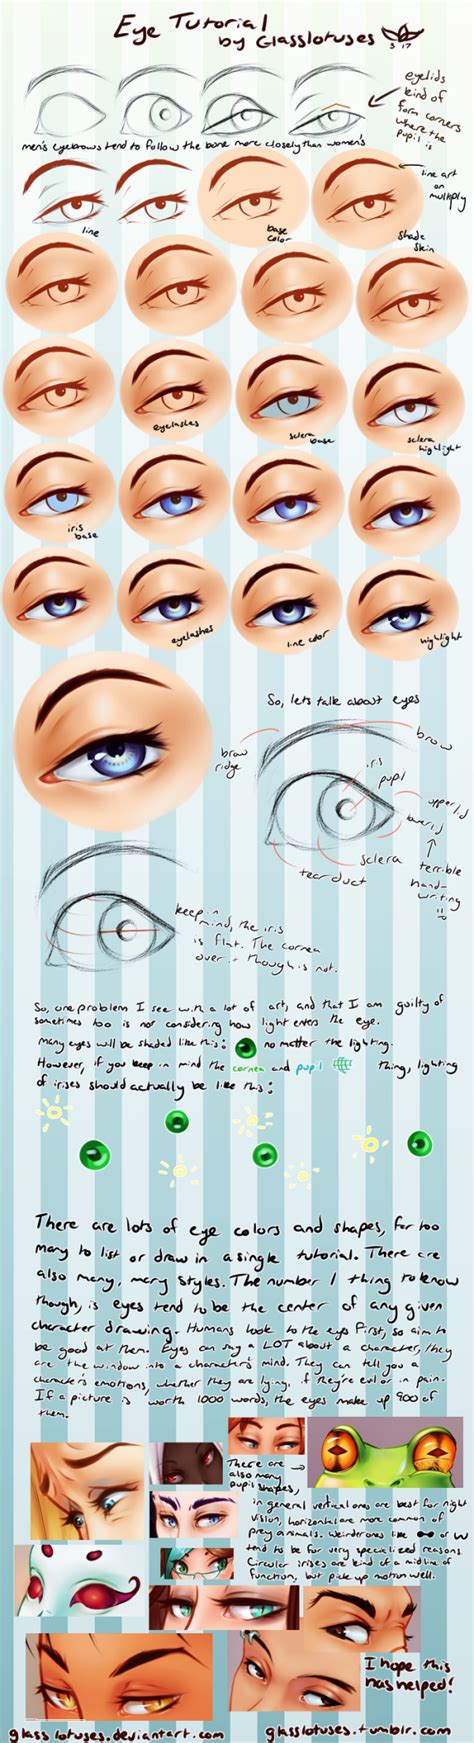 How To Paint An Eye 25 Amazing Tutorials Bored Art Eye Drawing